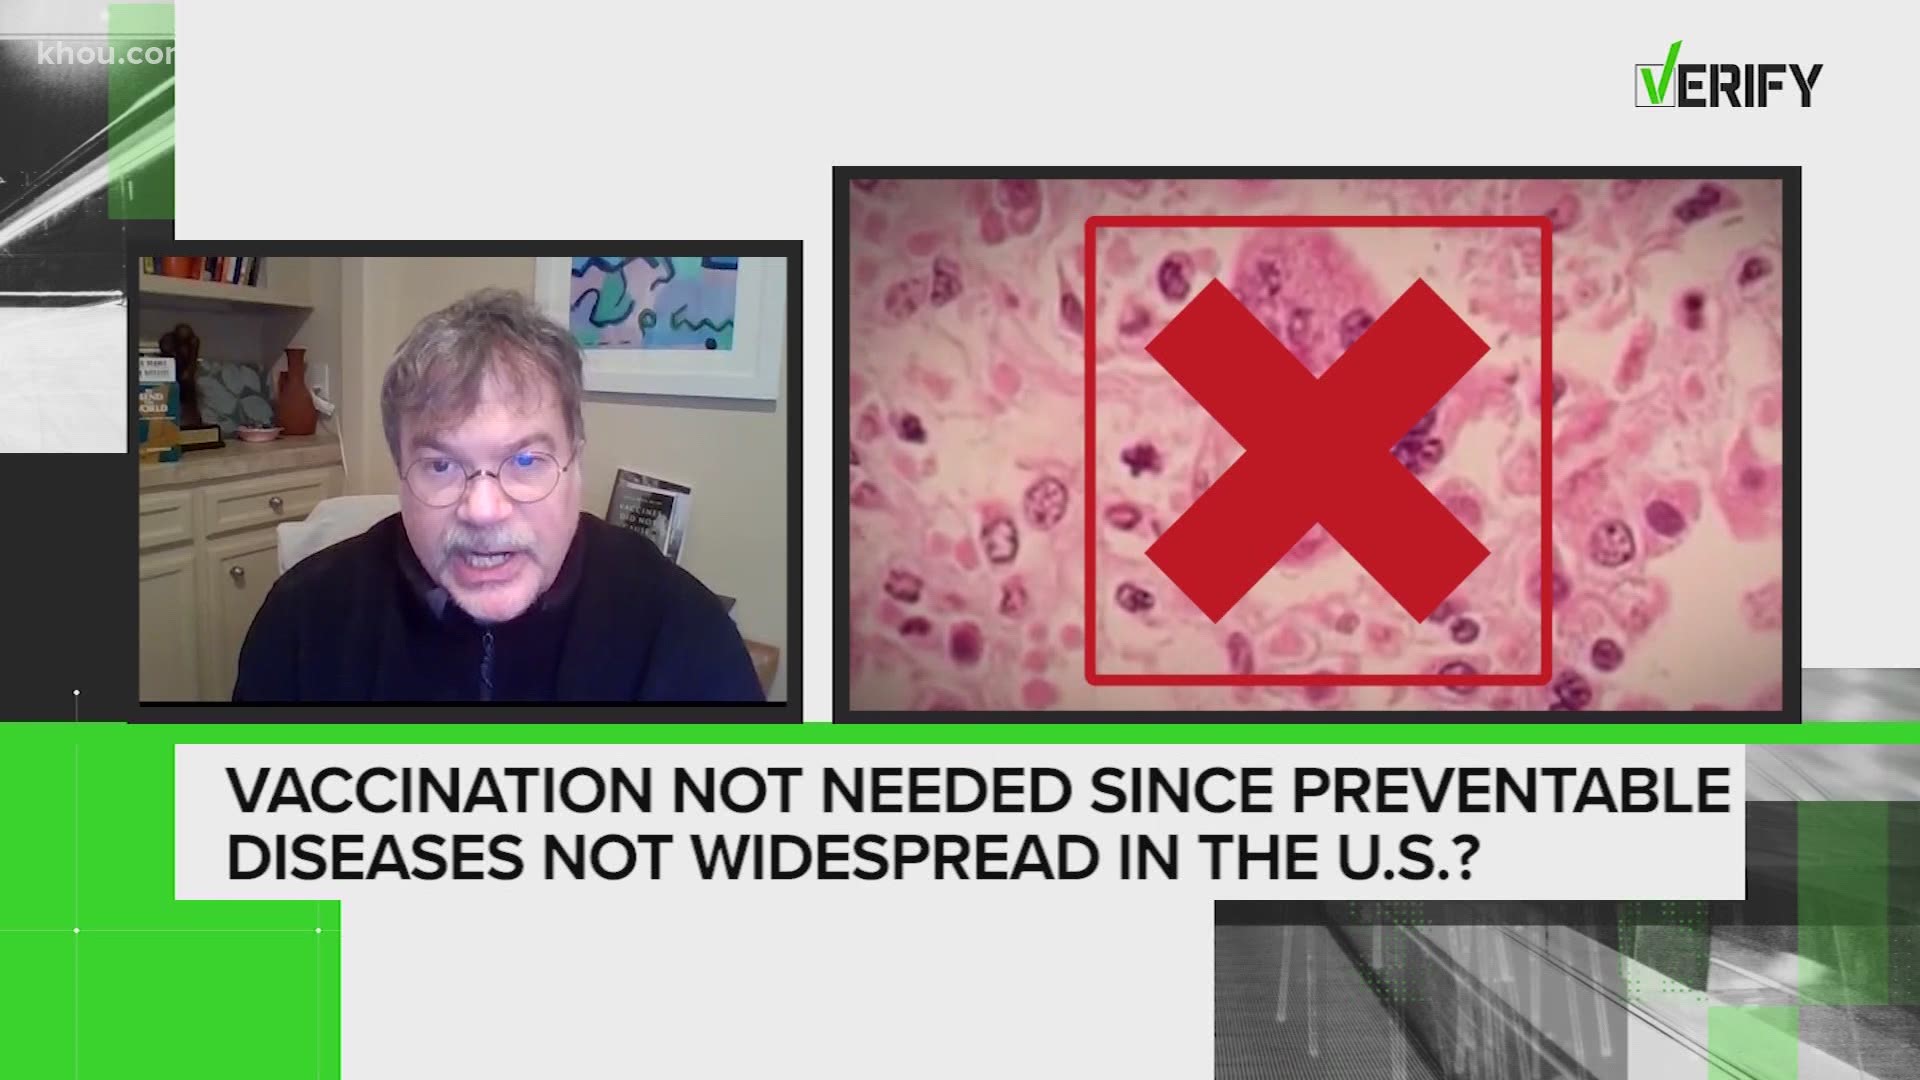 World-renowned expert Dr. Peter Hotez debunks vaccine myths as polling suggests half of Americans would not get a COVID-19 vaccine if and when available.